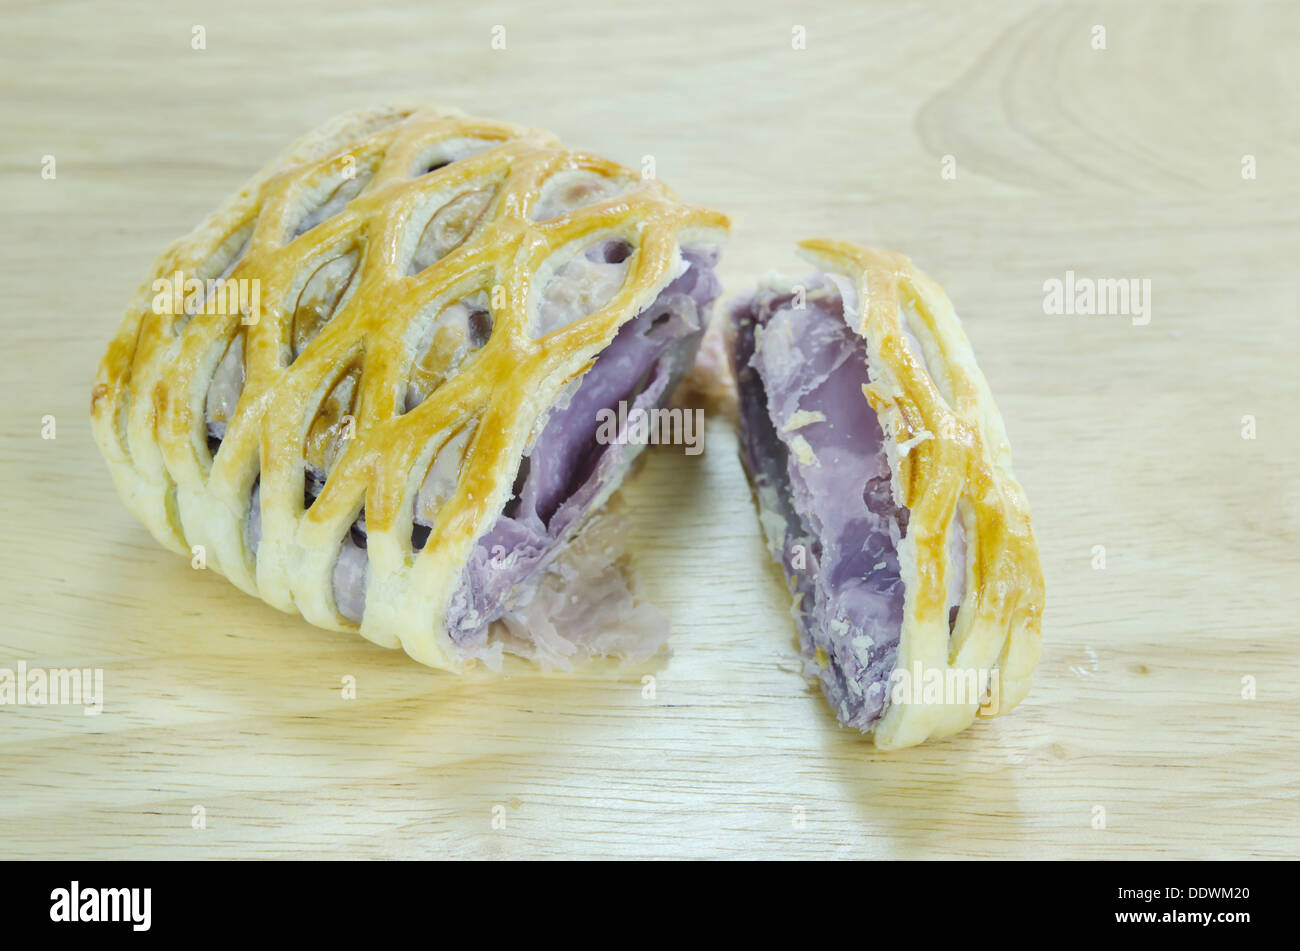 taro pies on wooden background with wooden spoon Stock Photo